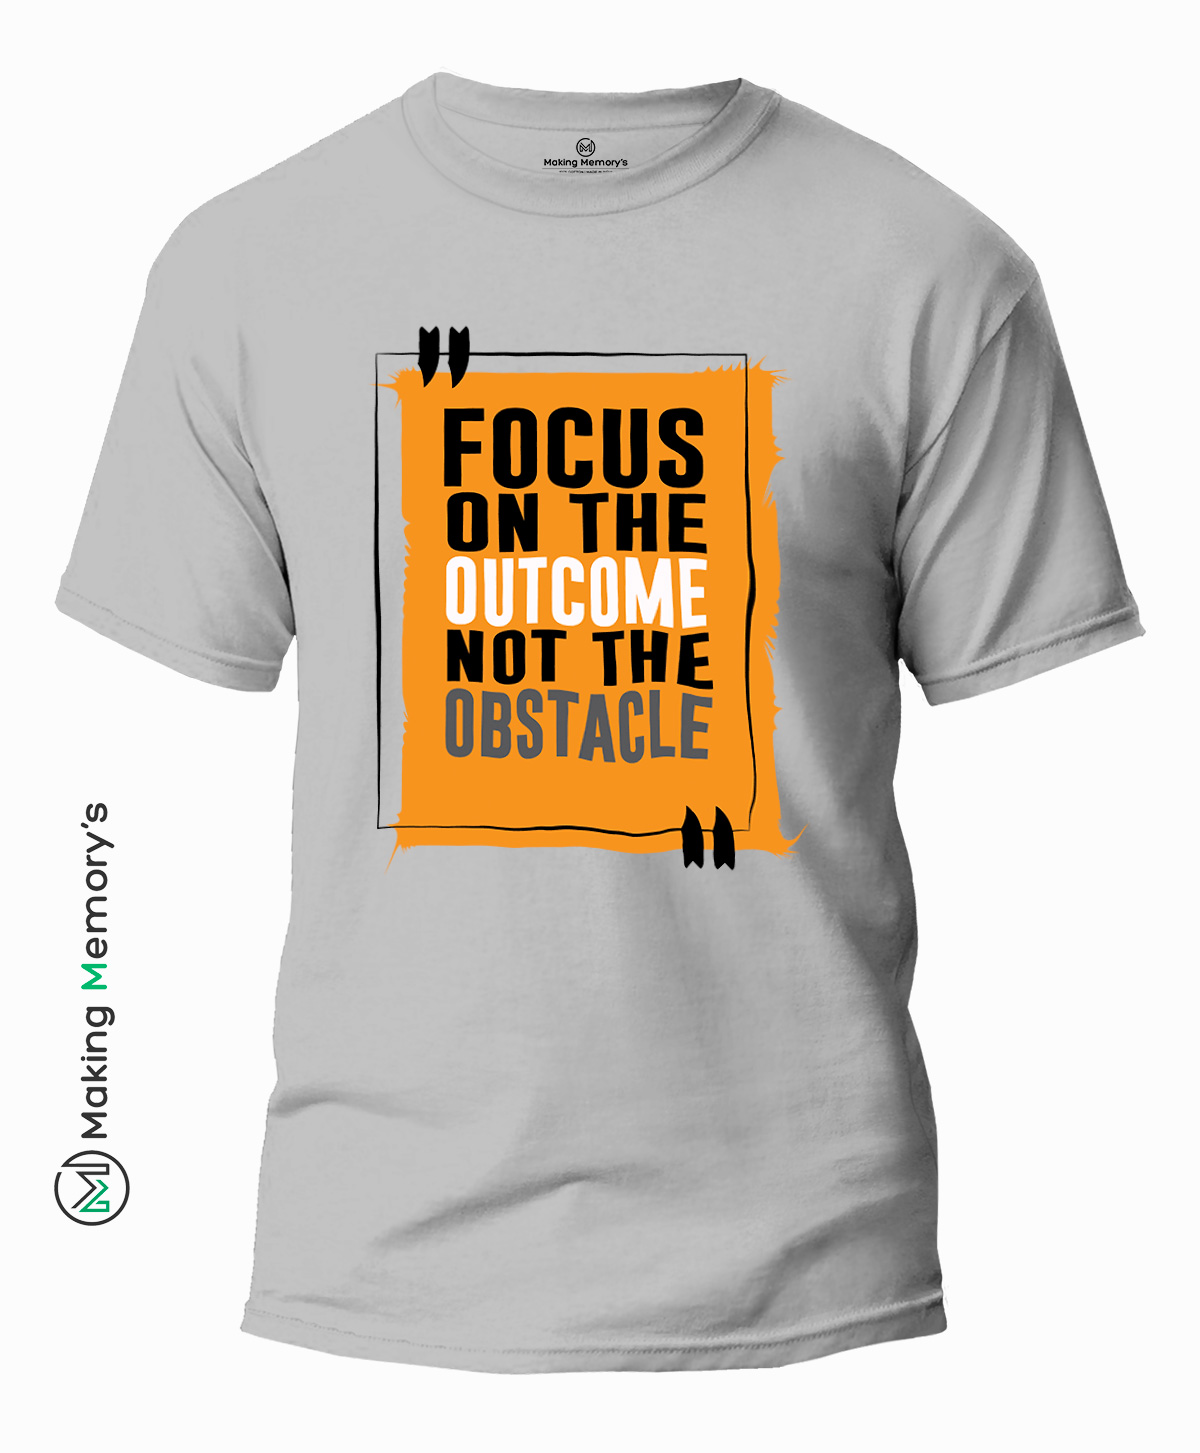 Focus-On-The-Outcome-Not-The-Obstacle-Gray-T-Shirt